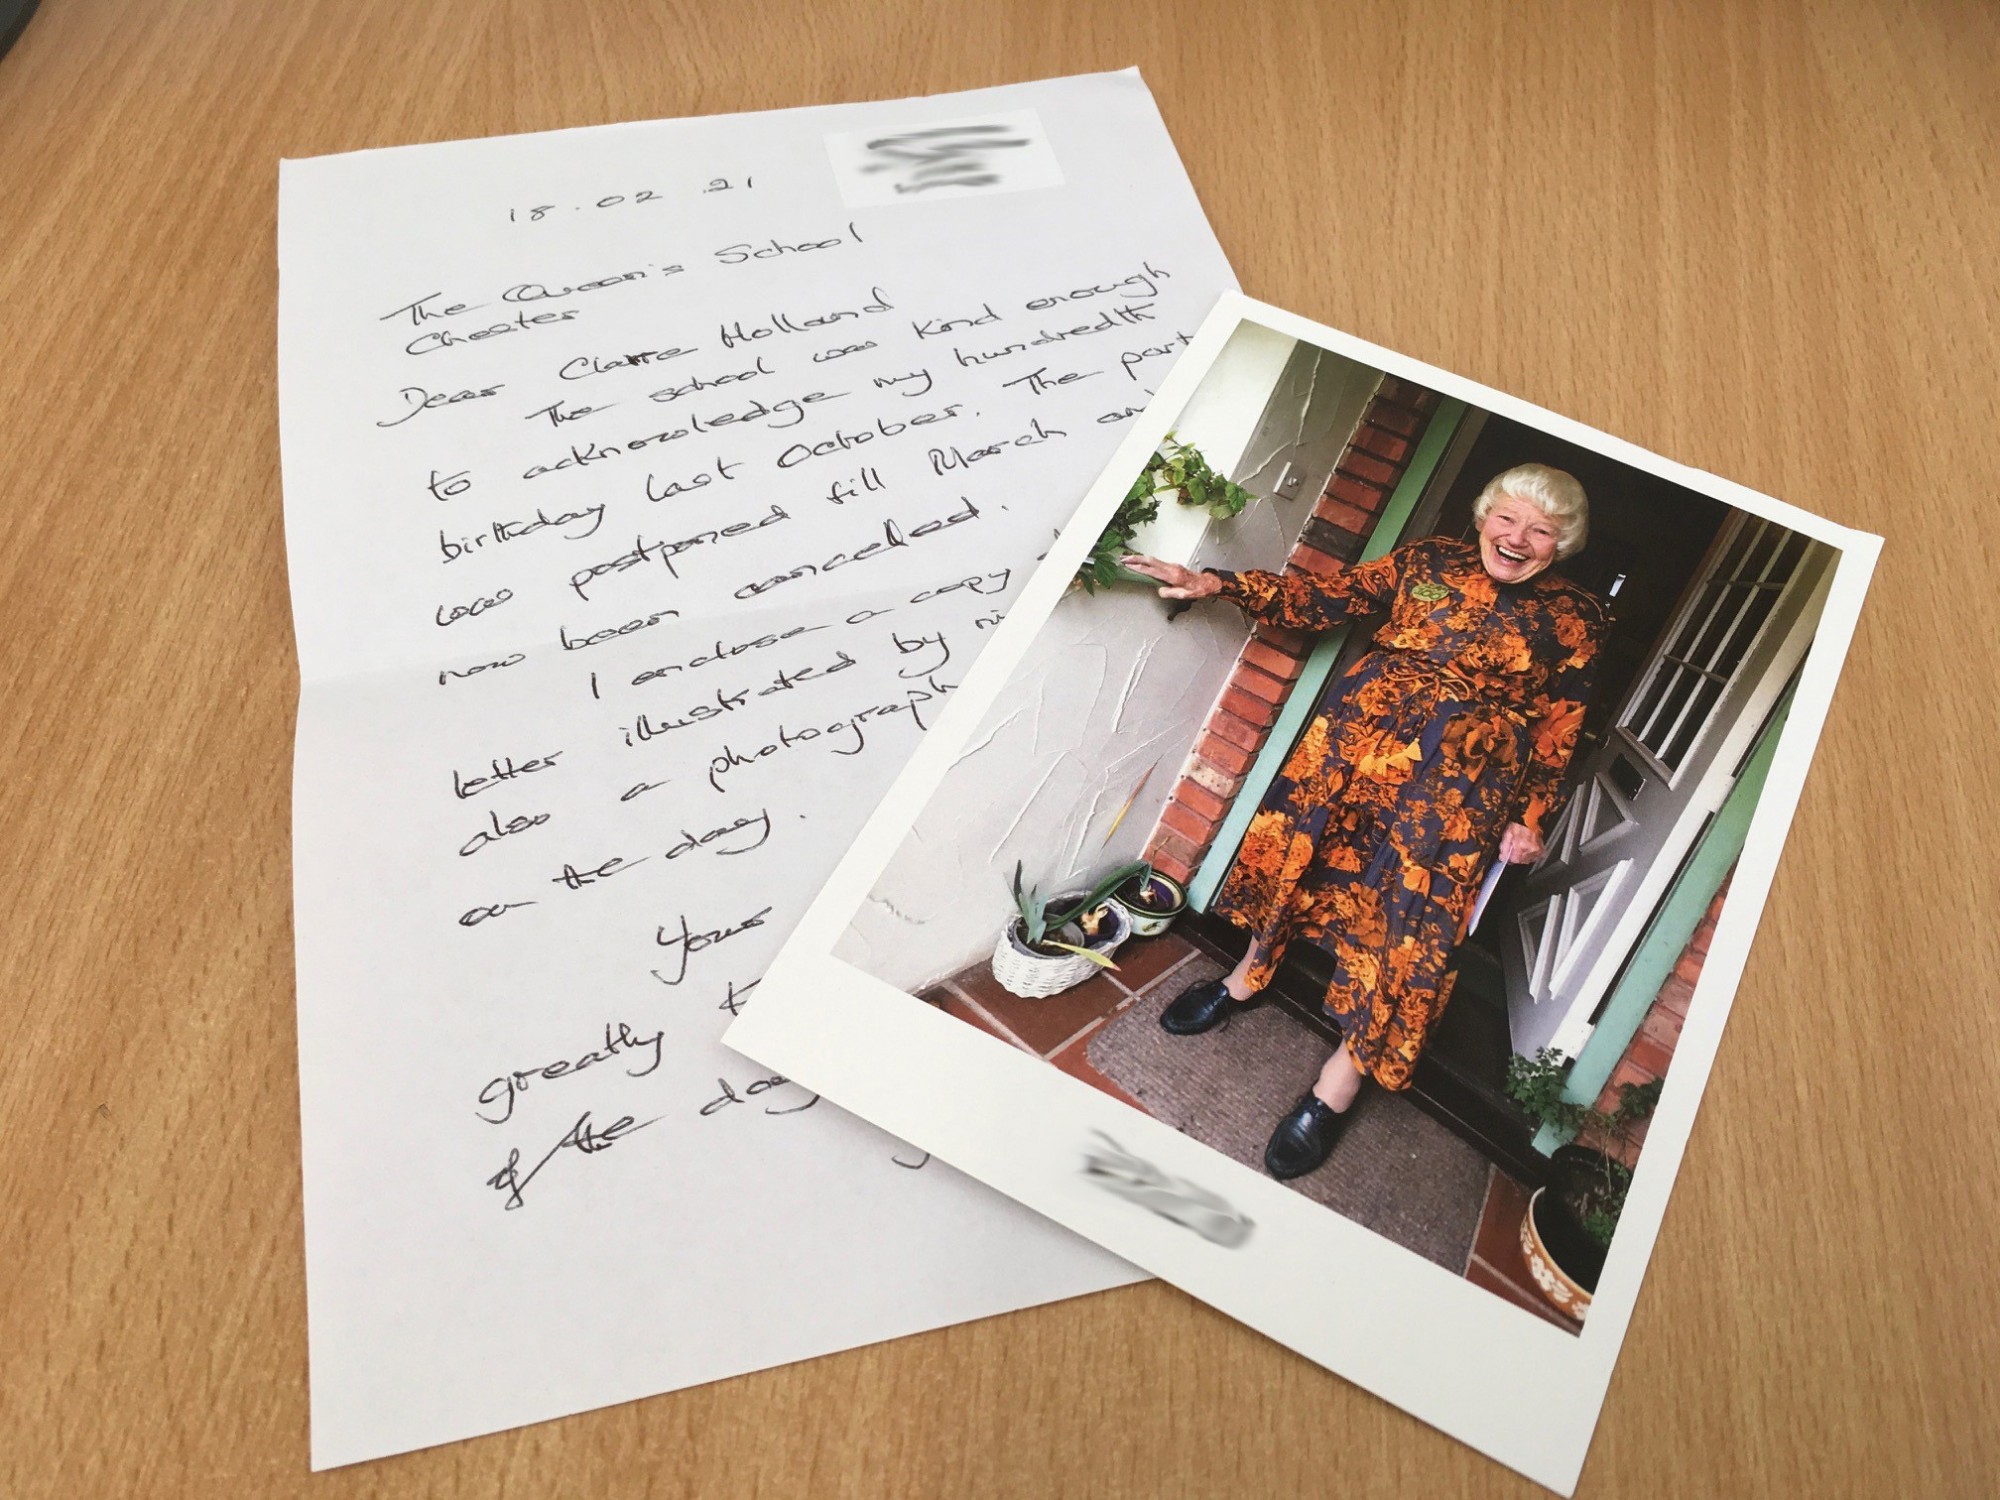 Alumna Frances and letter to Queen's